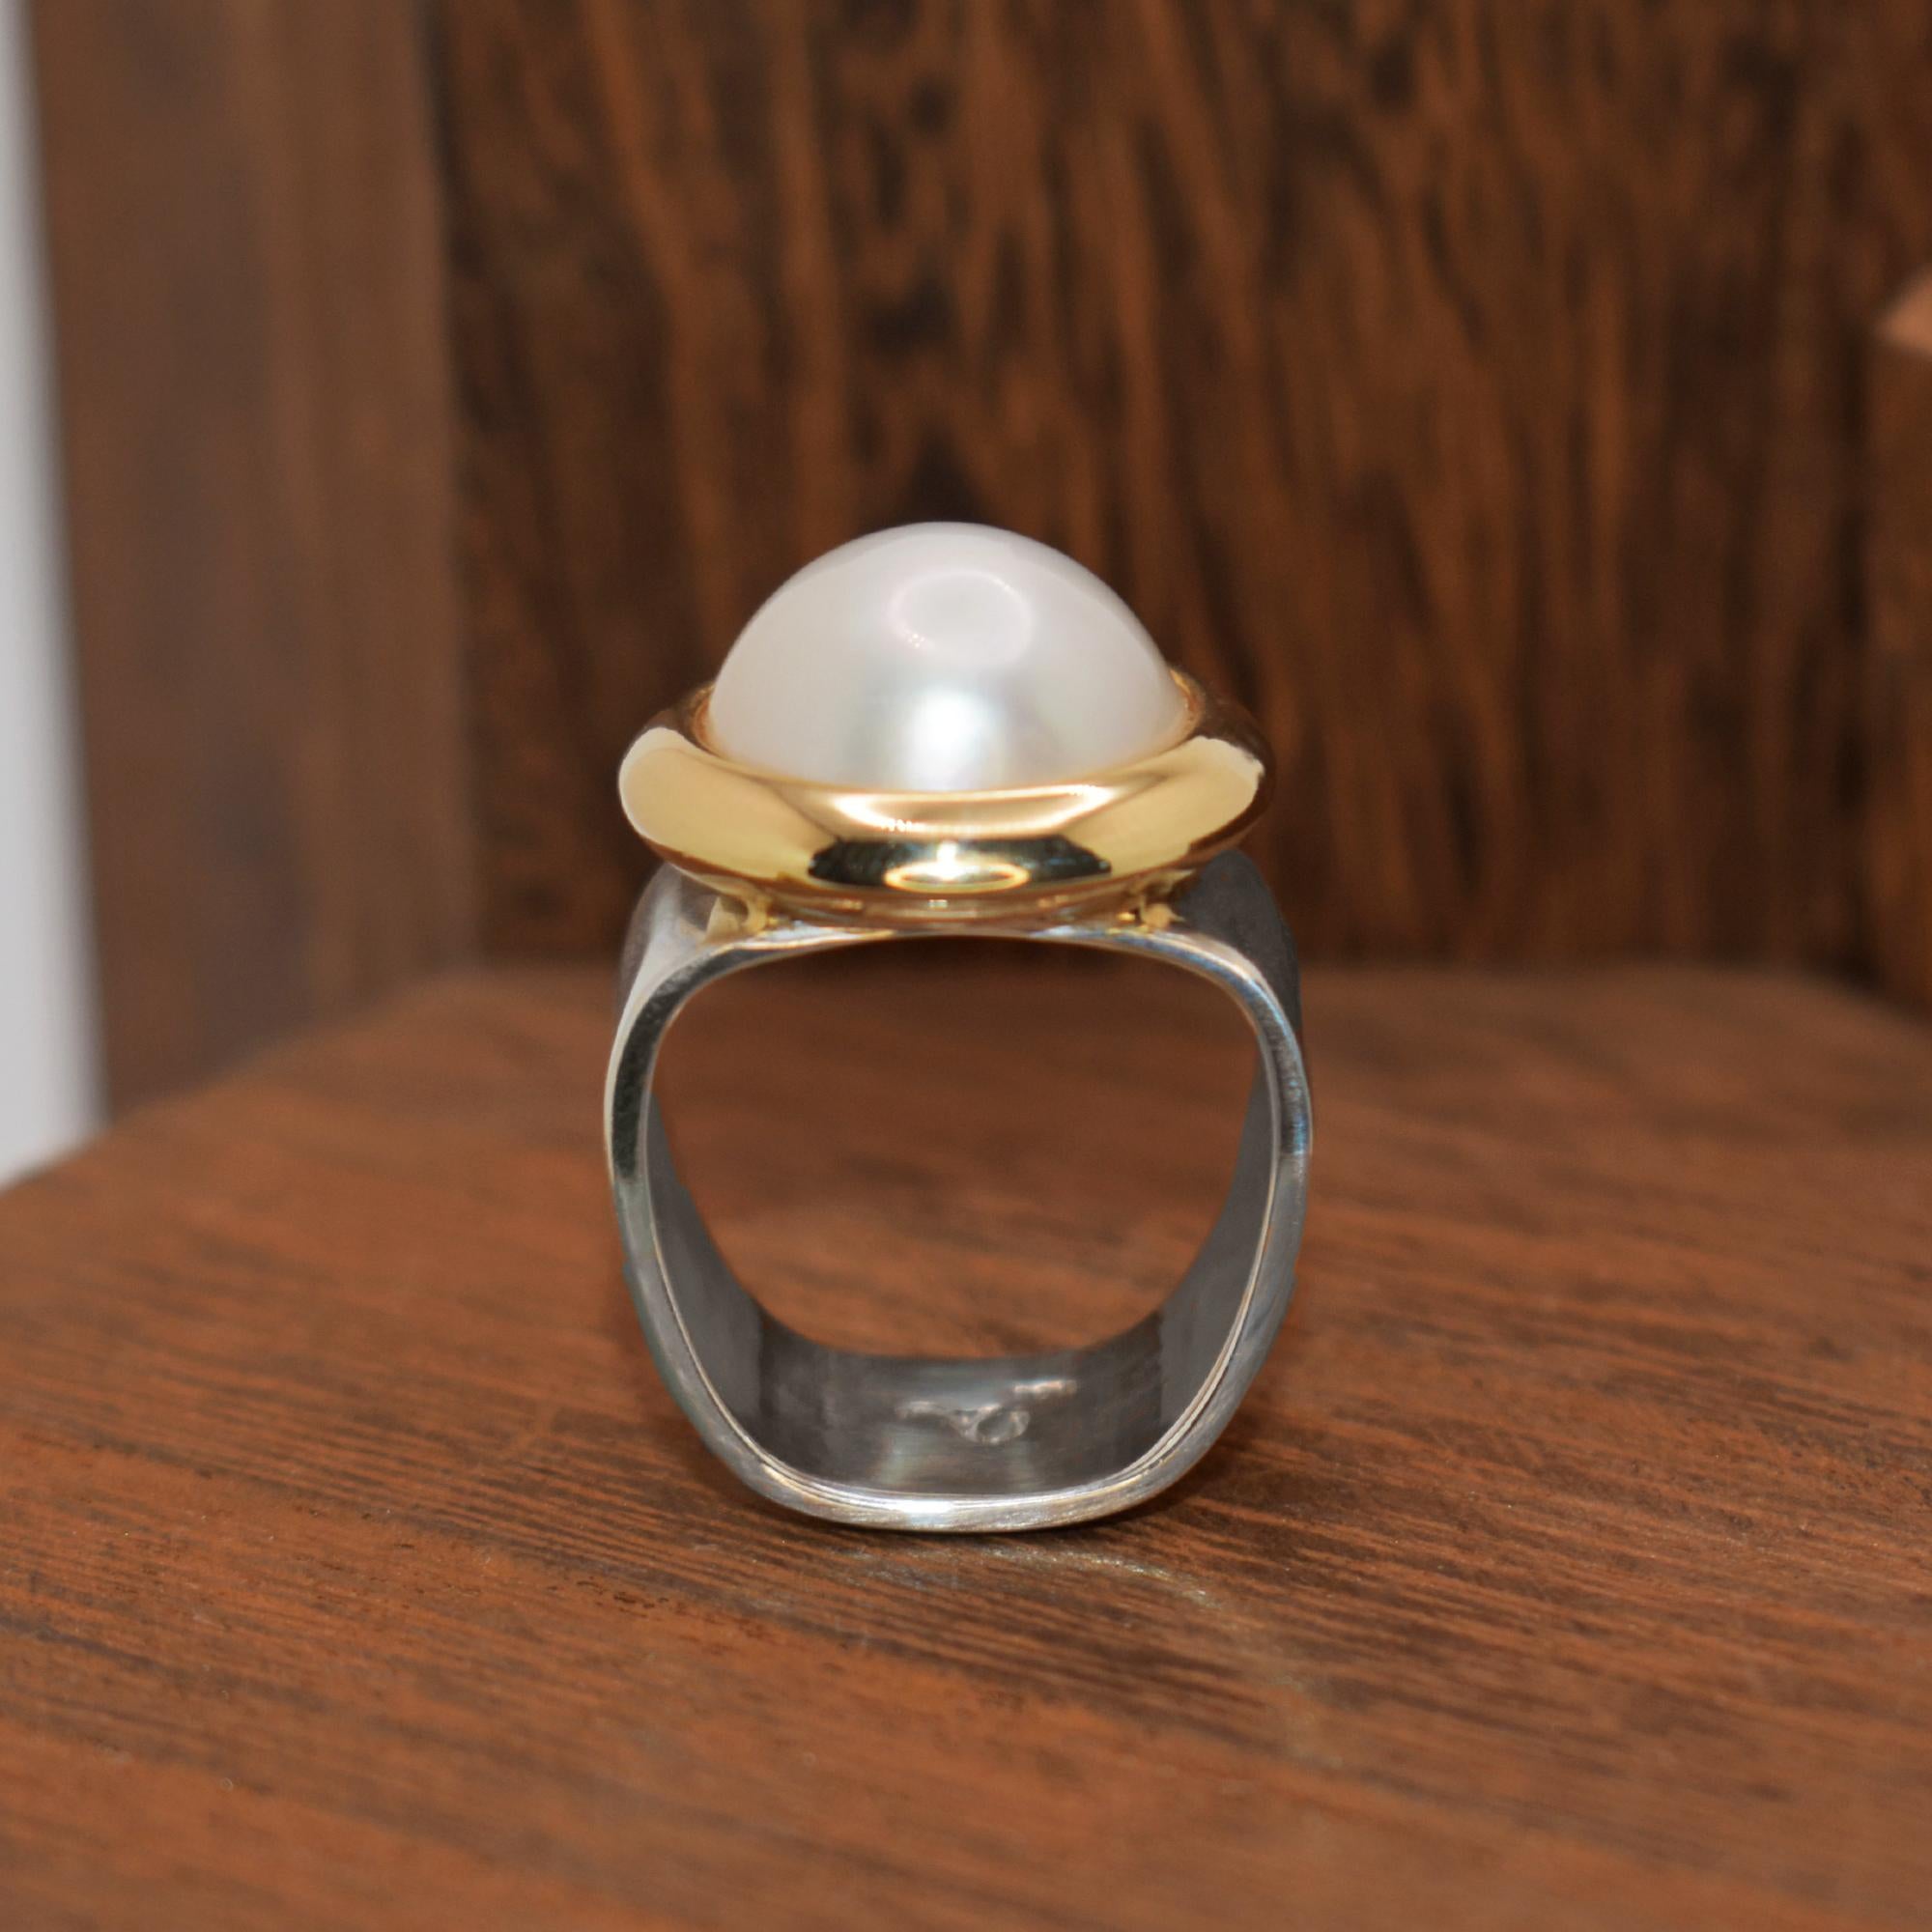 Freshwater Mabé Pearl set in a 14k yellow gold modern bezel on a wide sterling silver square shape ring band. Cocktail ring is size 7 and is resizable. Mabé Pearl measures 15mm across and 7mm in height. Ring band is 12mm in width. Contemporary,